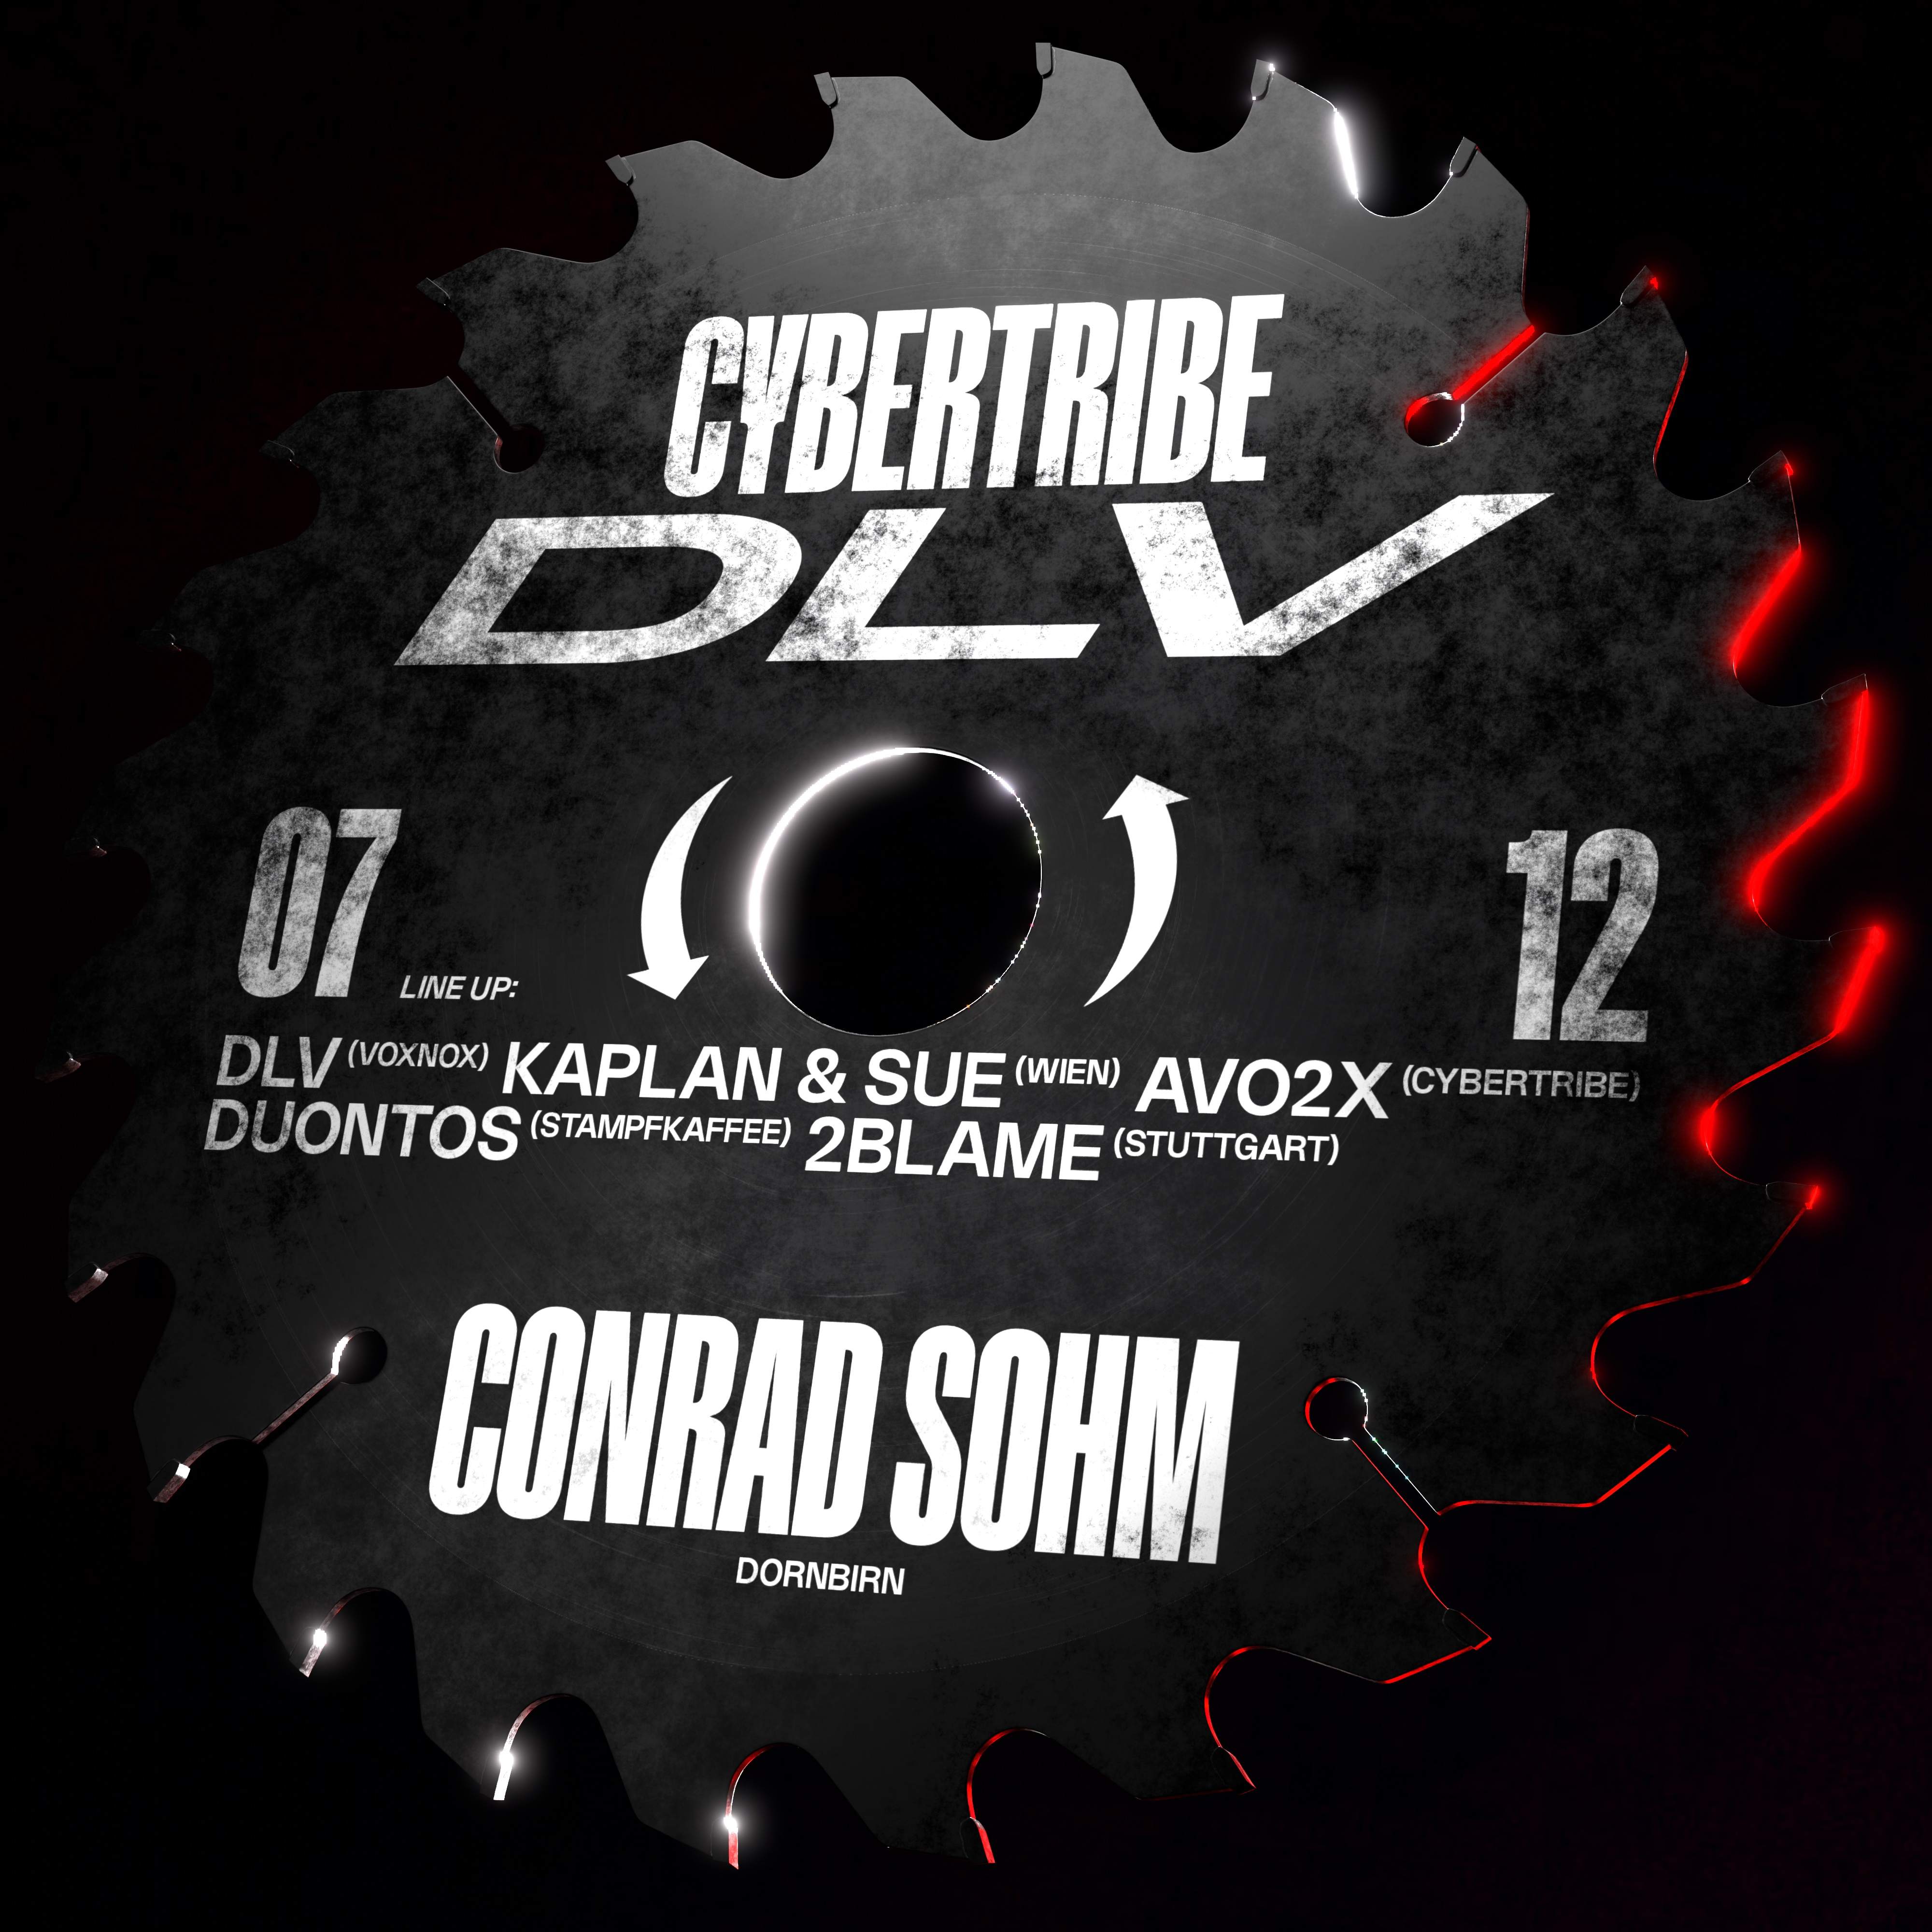 Cybertribe with DLV - フライヤー表